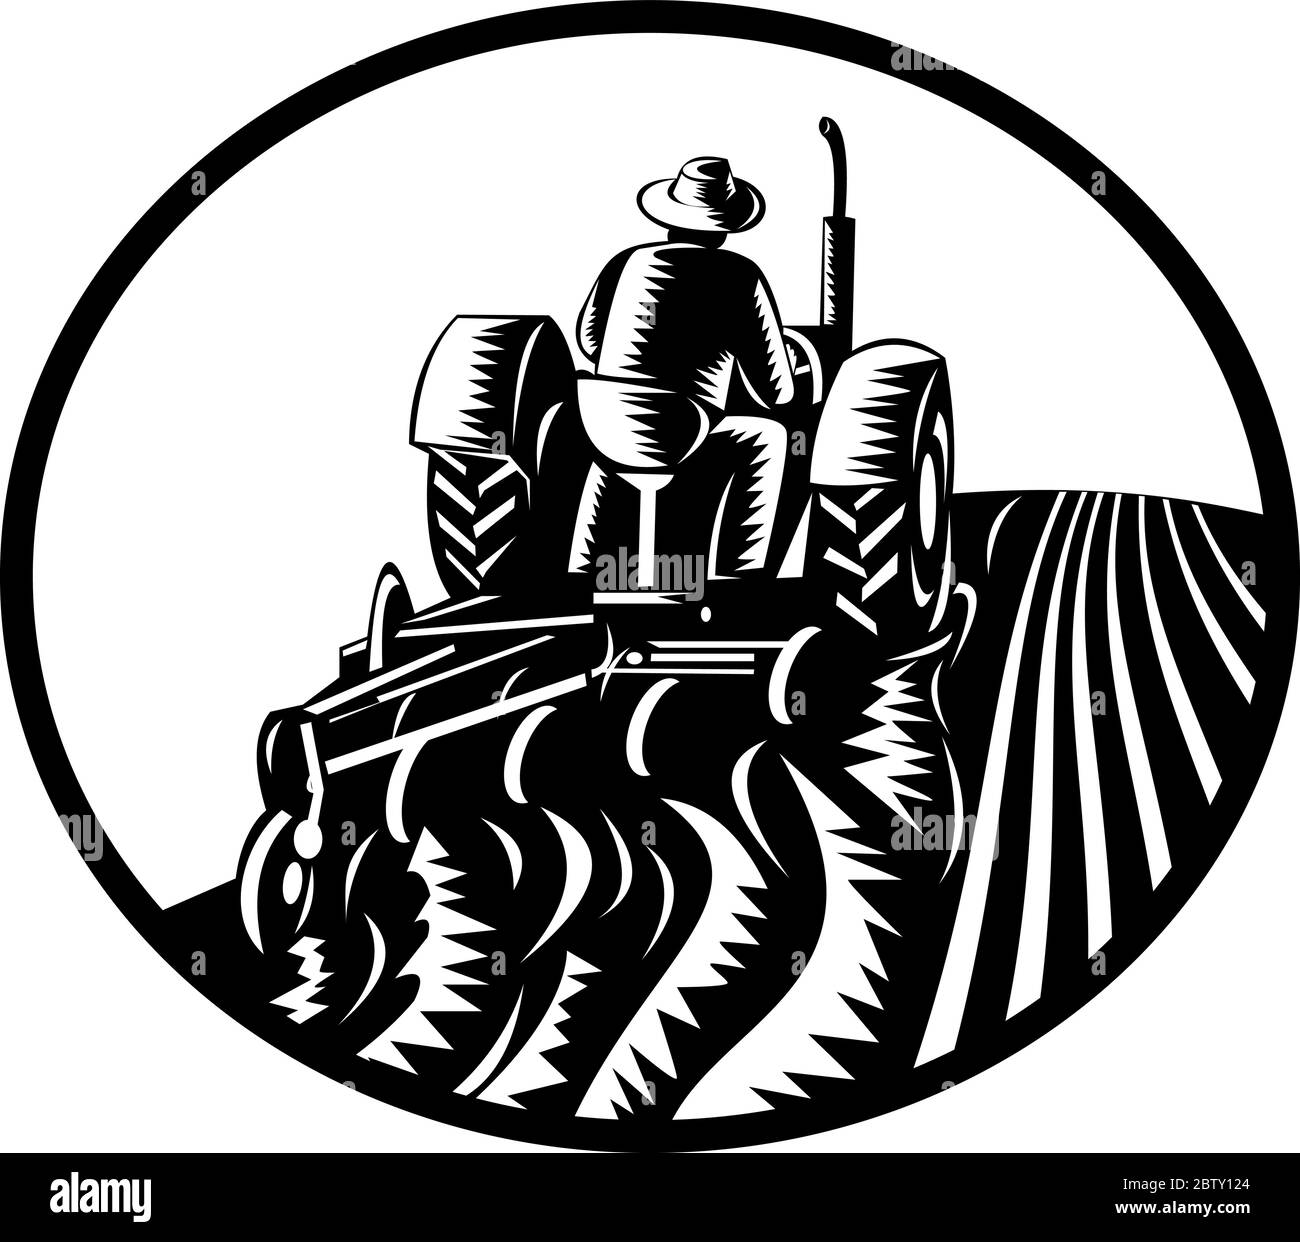 Retro illustration of an organic farmer worker driving a vintage tractor plowing farm or field viewed from rear set inside oval shape done in woodcut Stock Vector